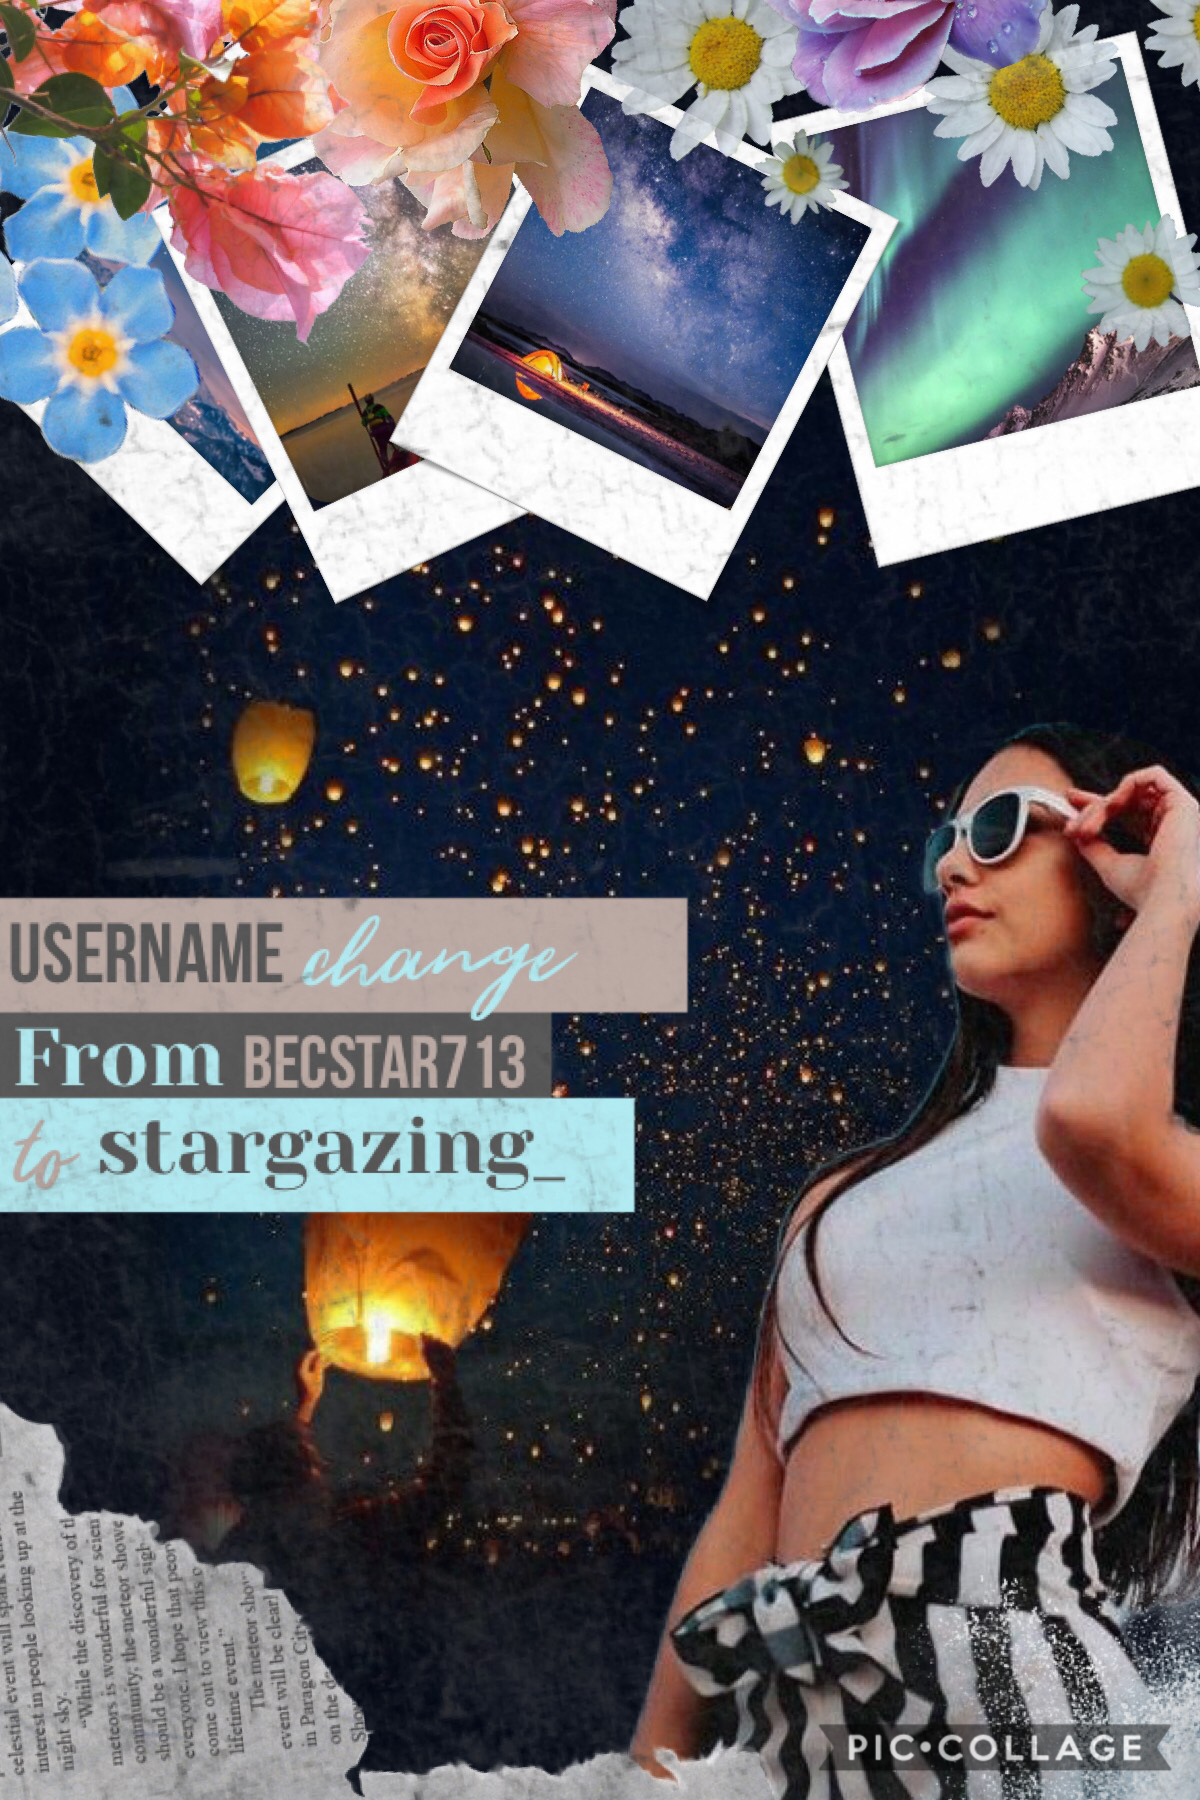 Username Change!!! TAP
Becstar713
To
stargazing_

I’ll change my extras and follows accounts usernames soonish 💐